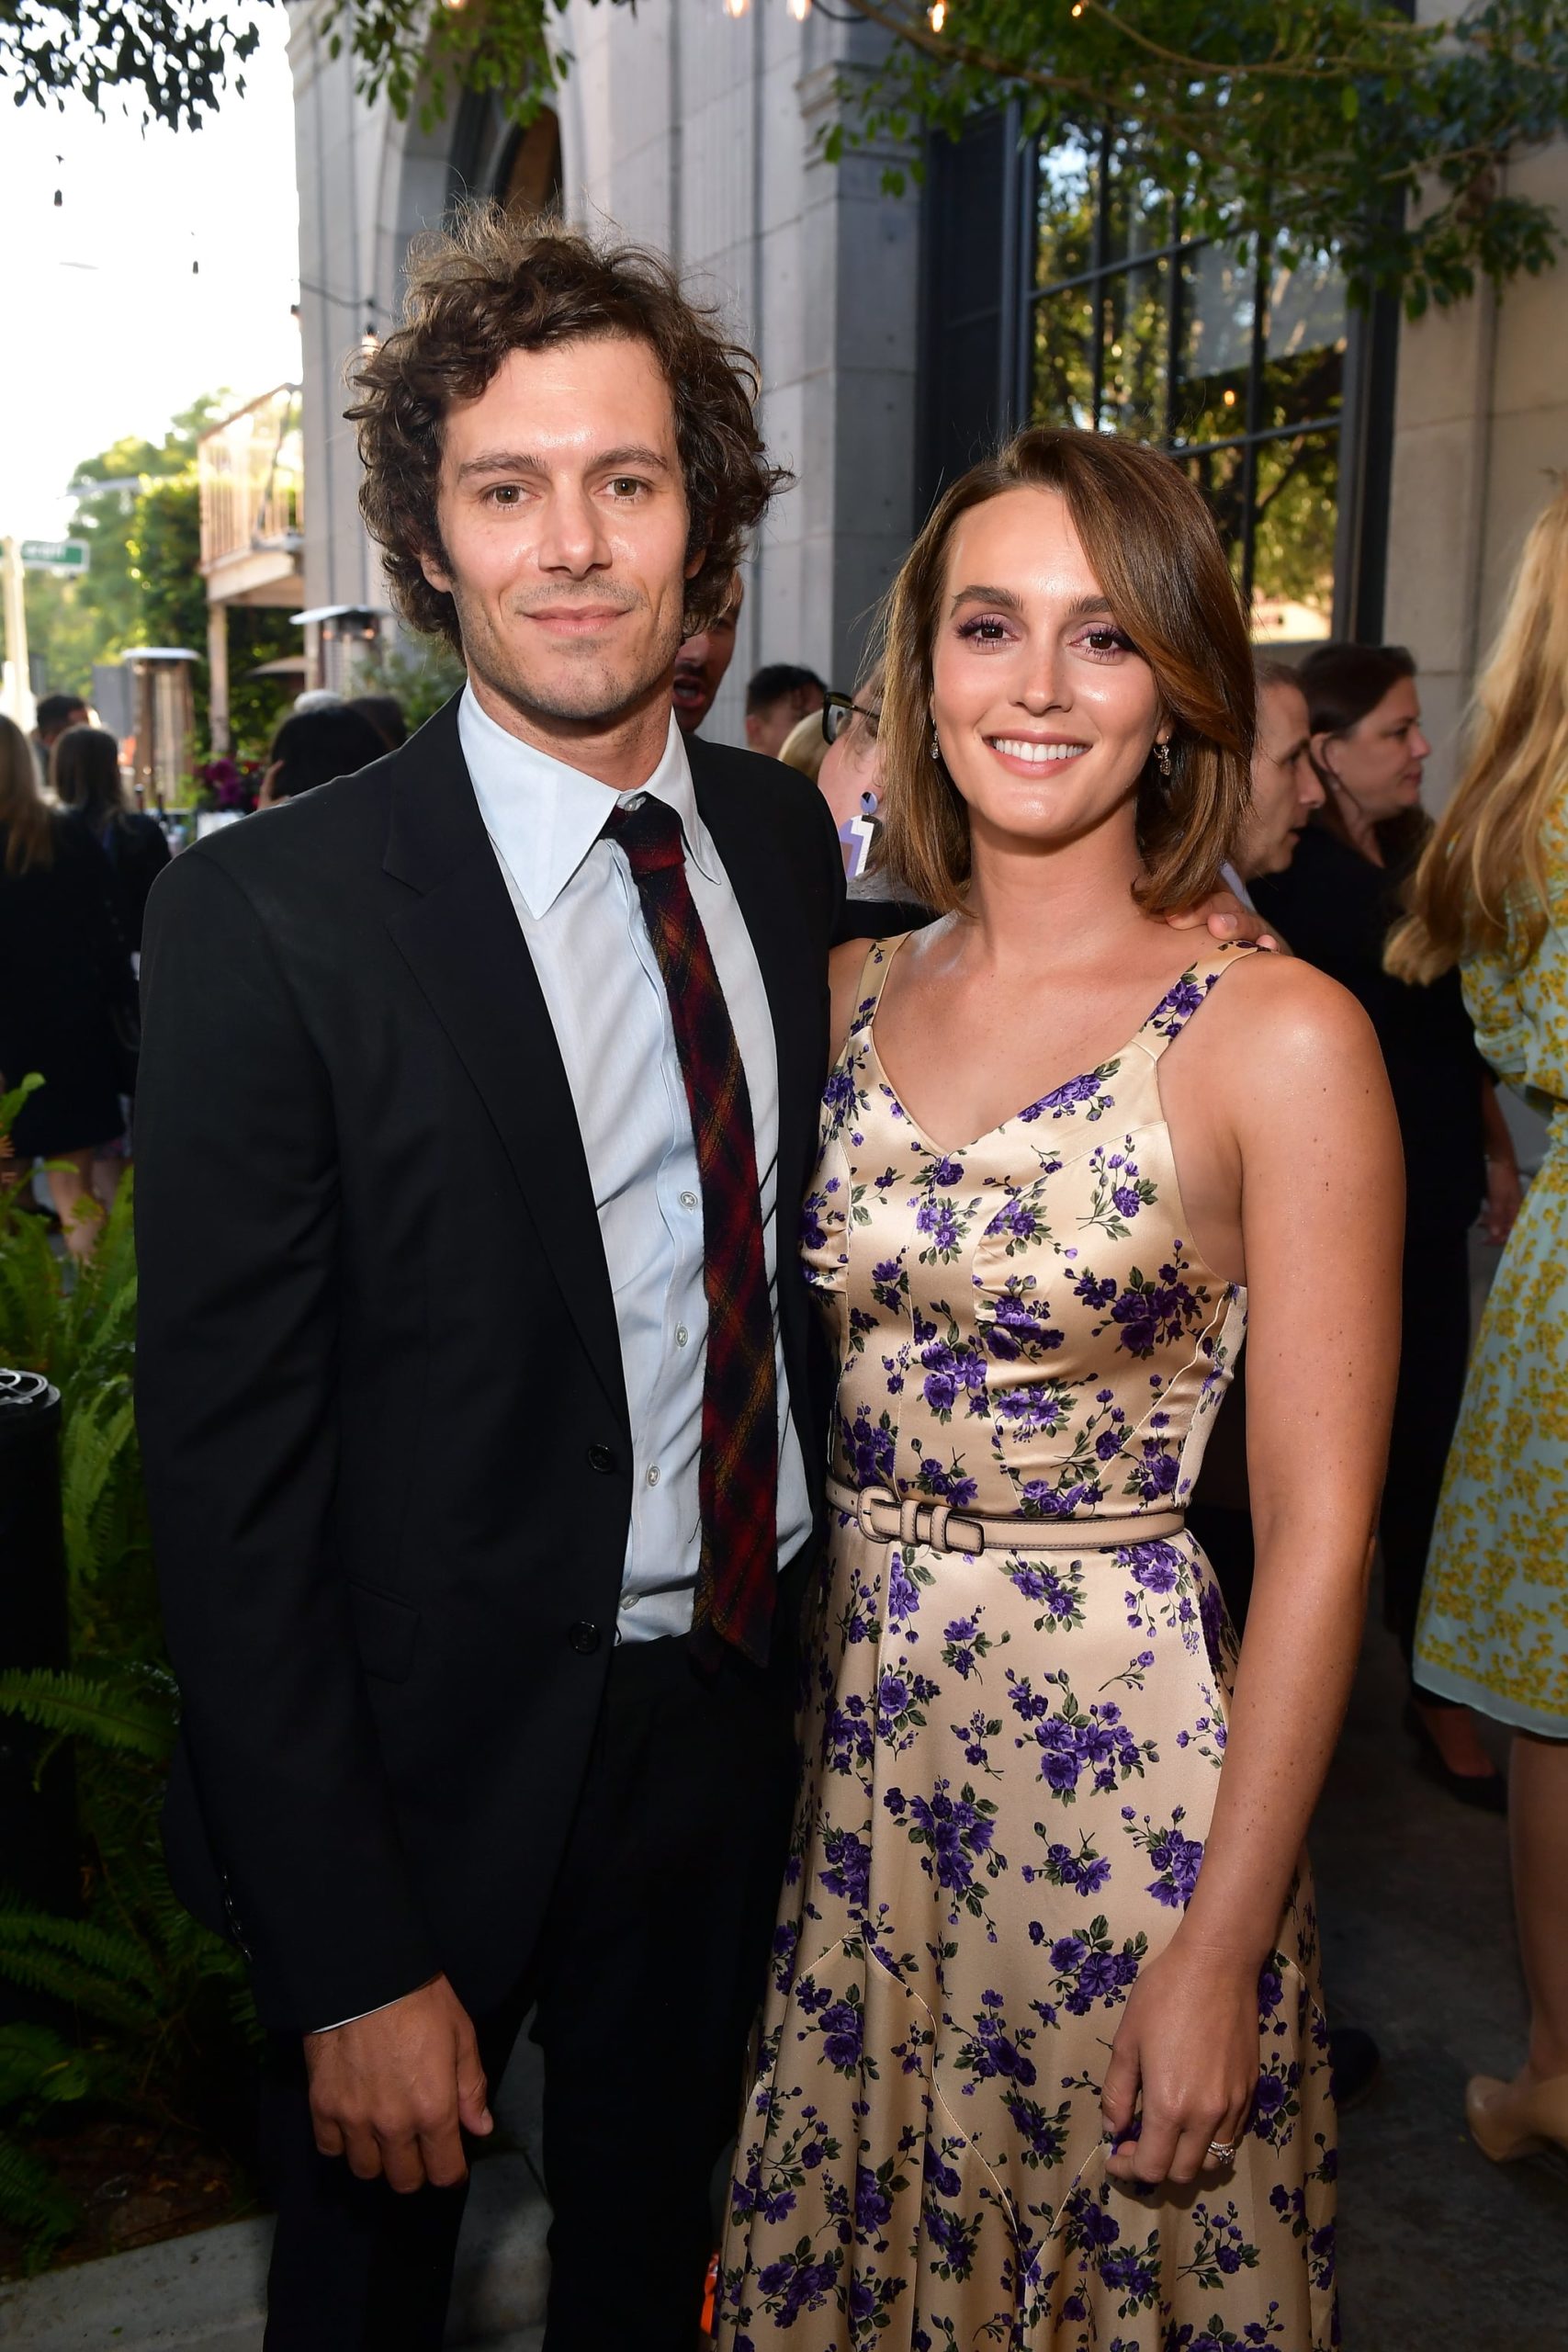 CULVER CITY, CALIFORNIA - AUGUST 19: (L-R) Adam Brody and Leighton Meester attend the LA Screening Of Fox Searchlight